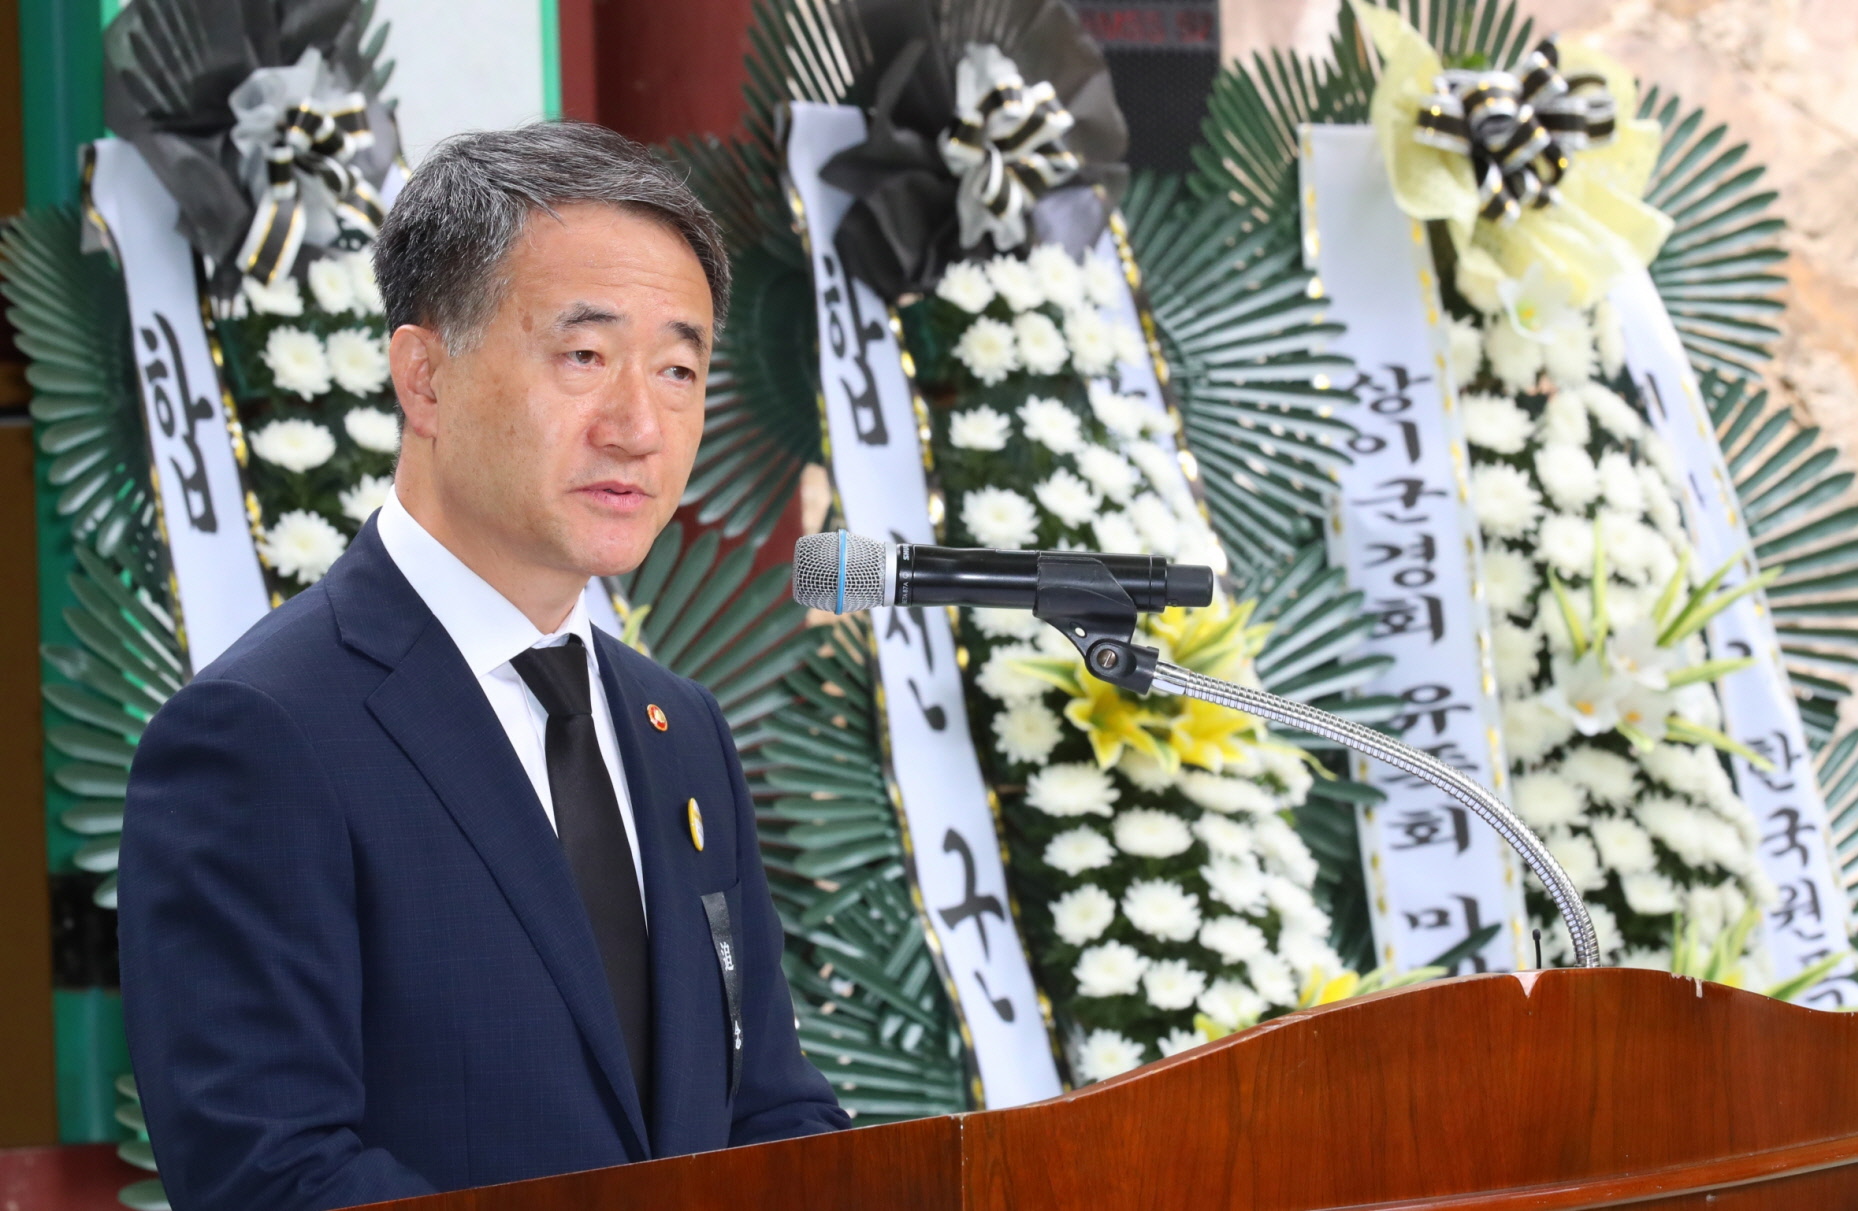 Minister Park Attends 74th Memorial Service for Korean Atomic Bomb Victims 사진15